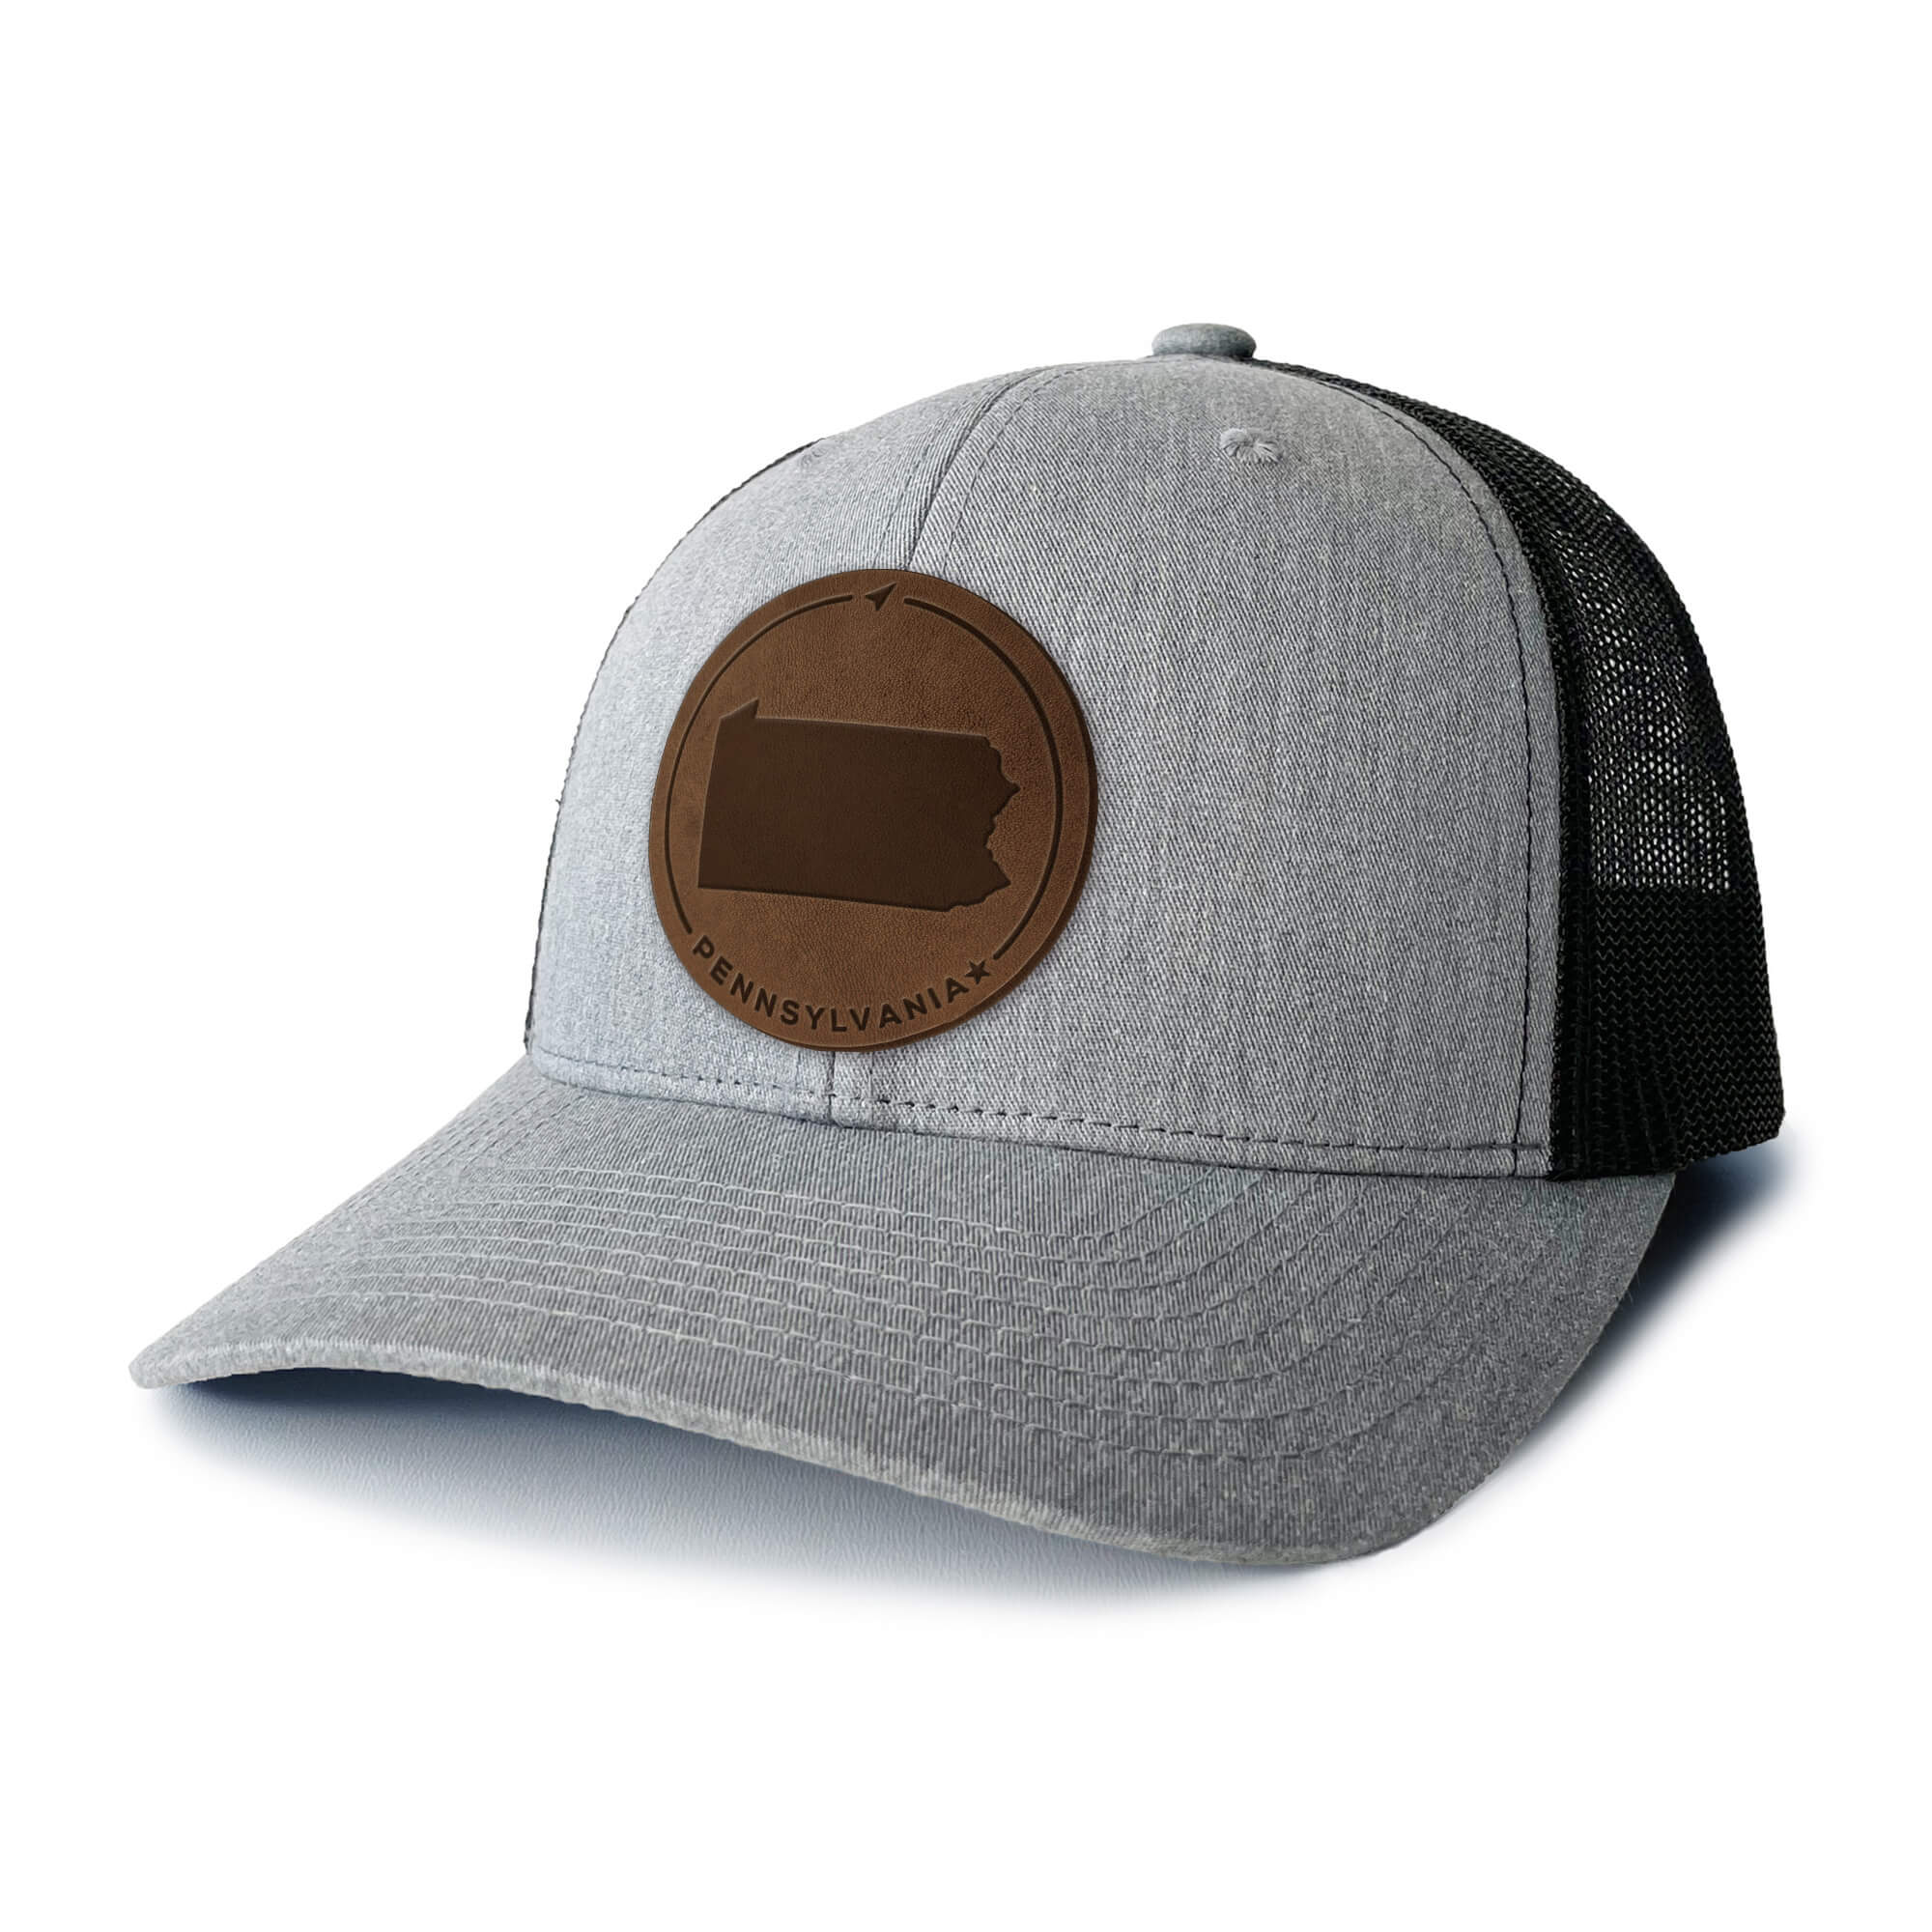 Heather Grey and white trucker hat with full-grain leather patch of Pennsylvania | BLACK-003-003, CHARC-003-003, NAVY-003-003, HGREY-003-003, MOSS-003-003, BROWN-003-003